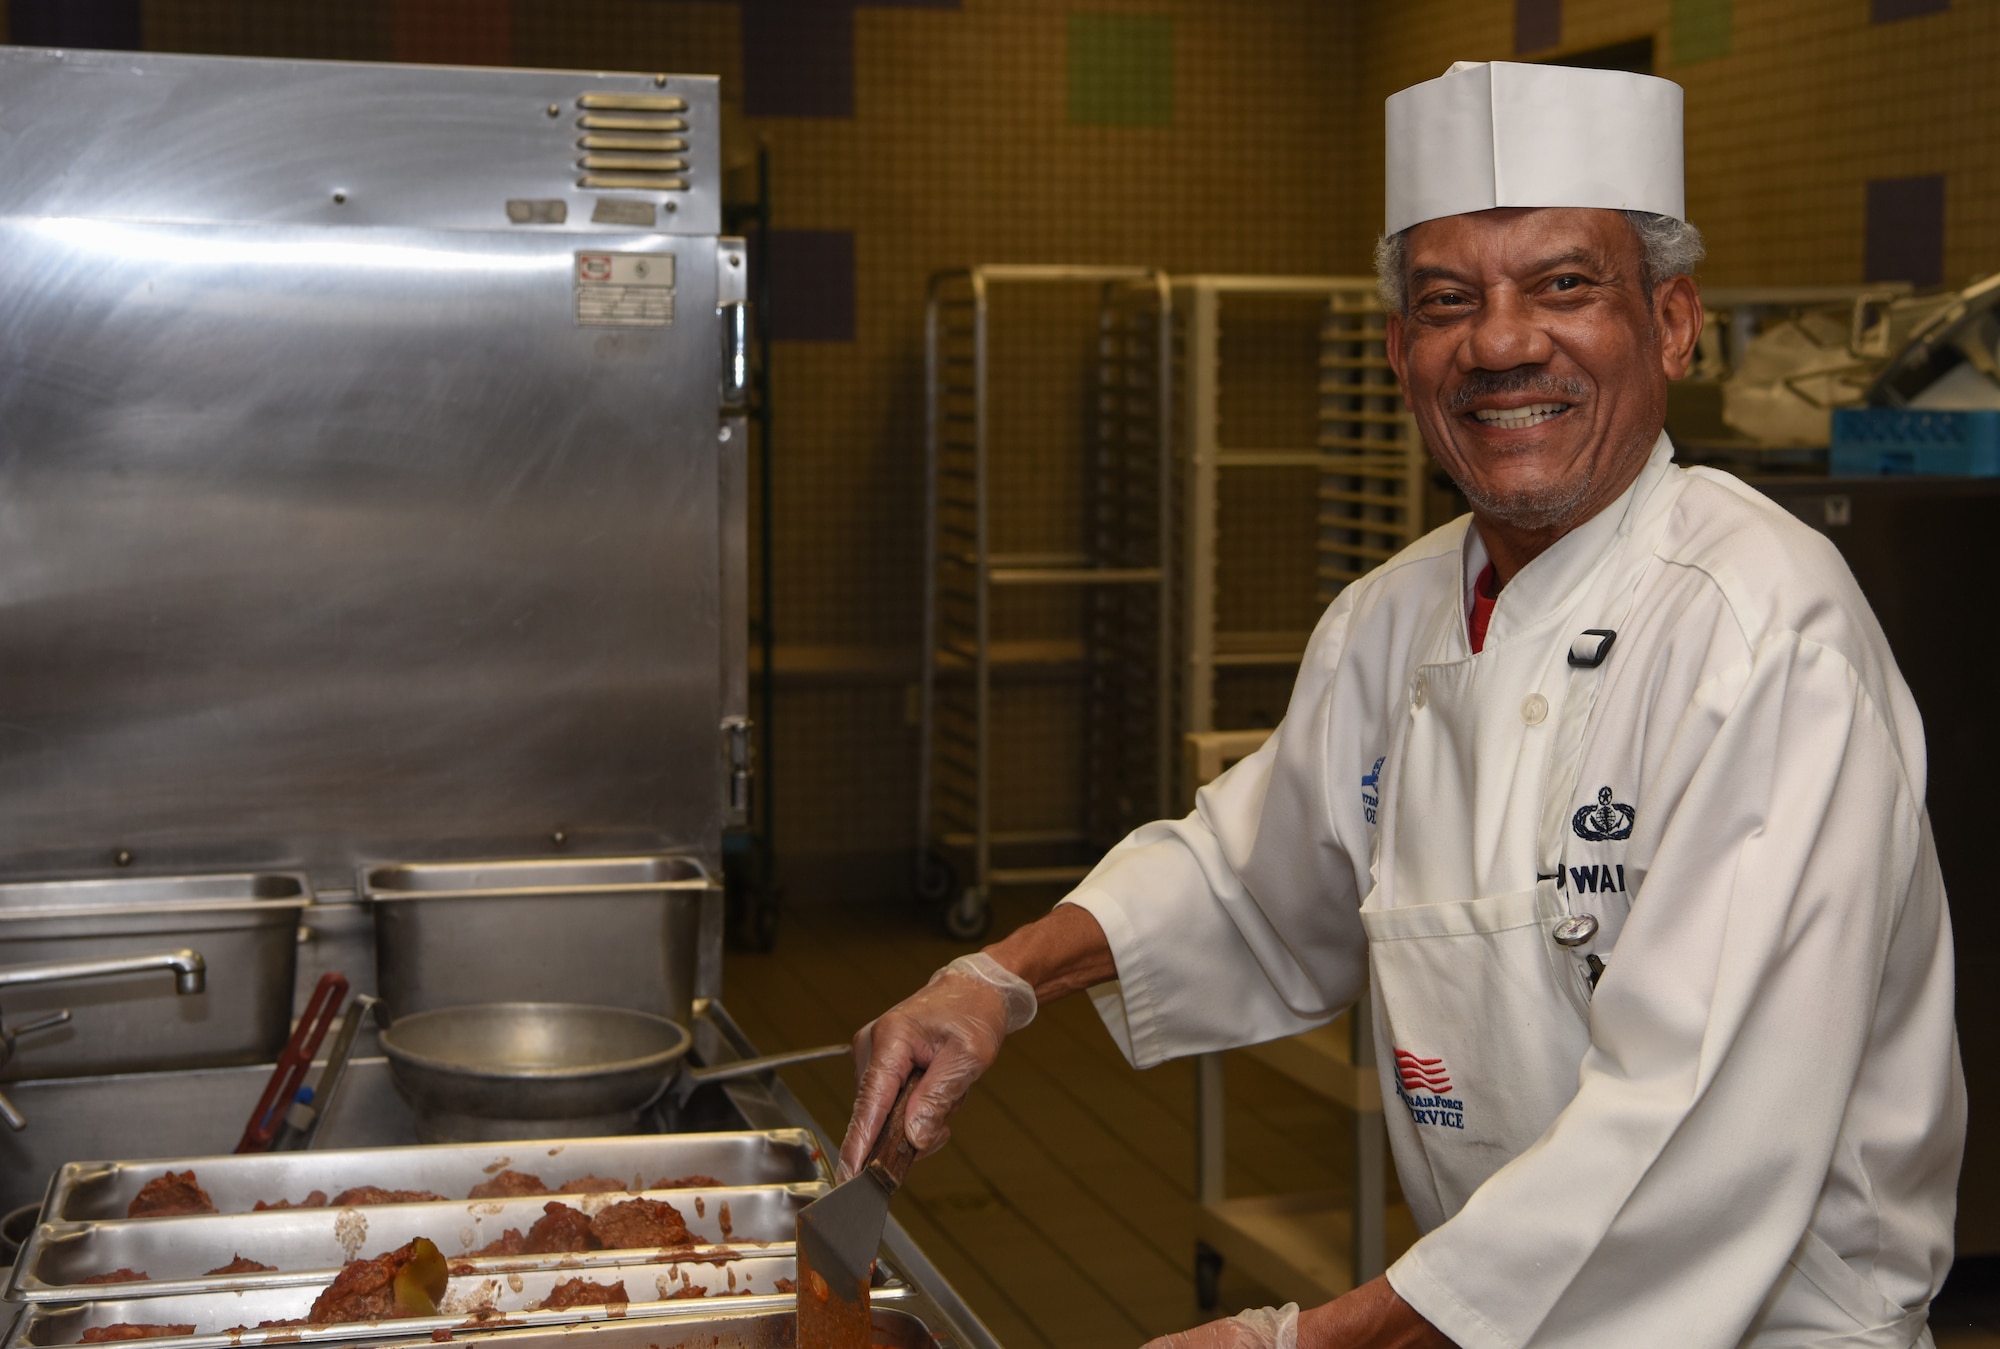 Septus Wallace, a 56th Force Support Squadron food services work leader, smiles as he prepares stuffed peppers for lunch at the Hensman Dining Facility June 8, 2018 at Luke Air Force Base, Ariz.